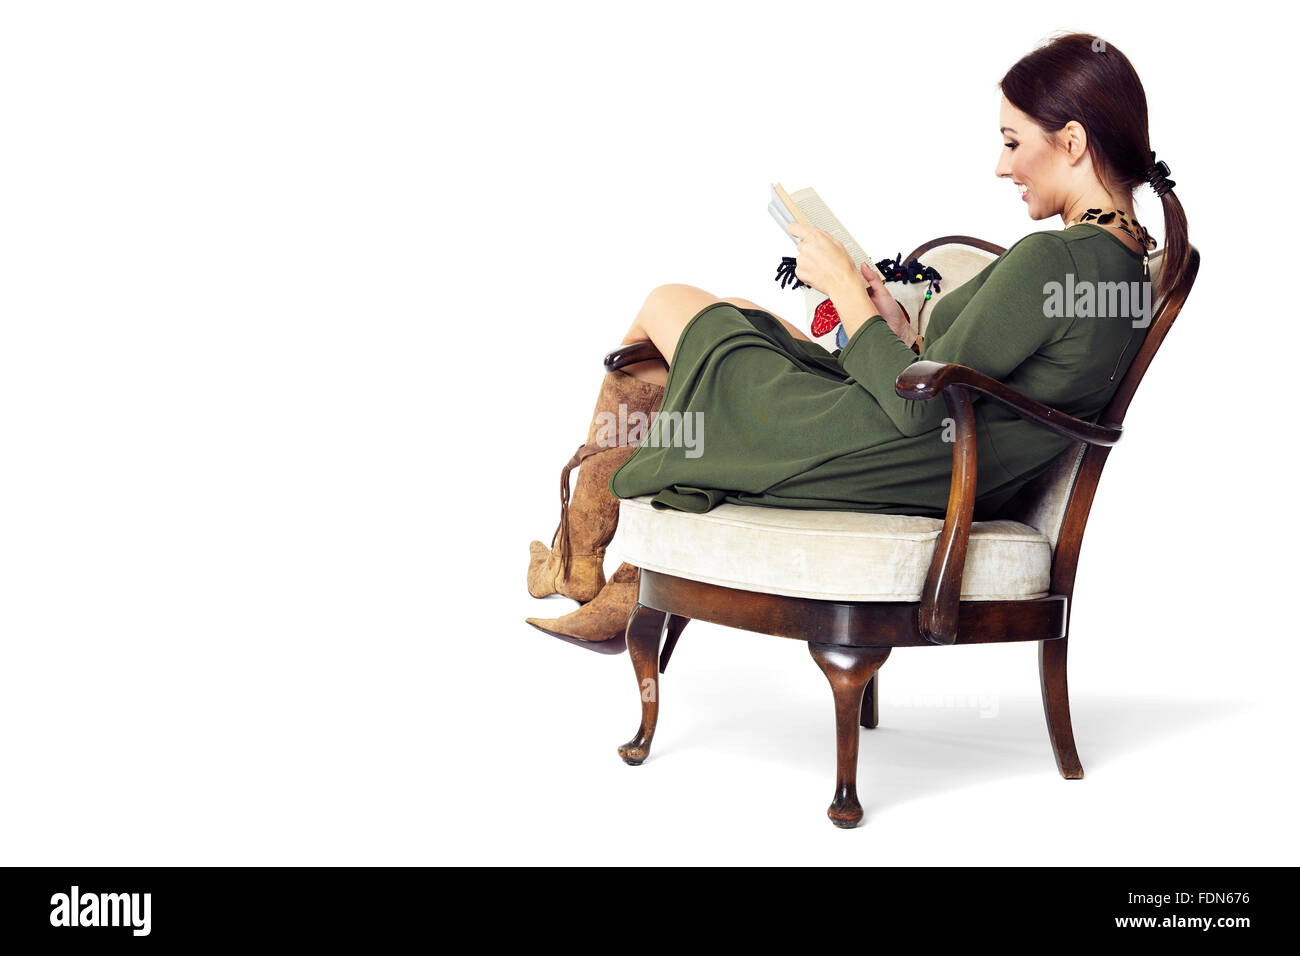 Cheerful woman sitting on chair and reading a book. Isolated on white background. Stock Photo